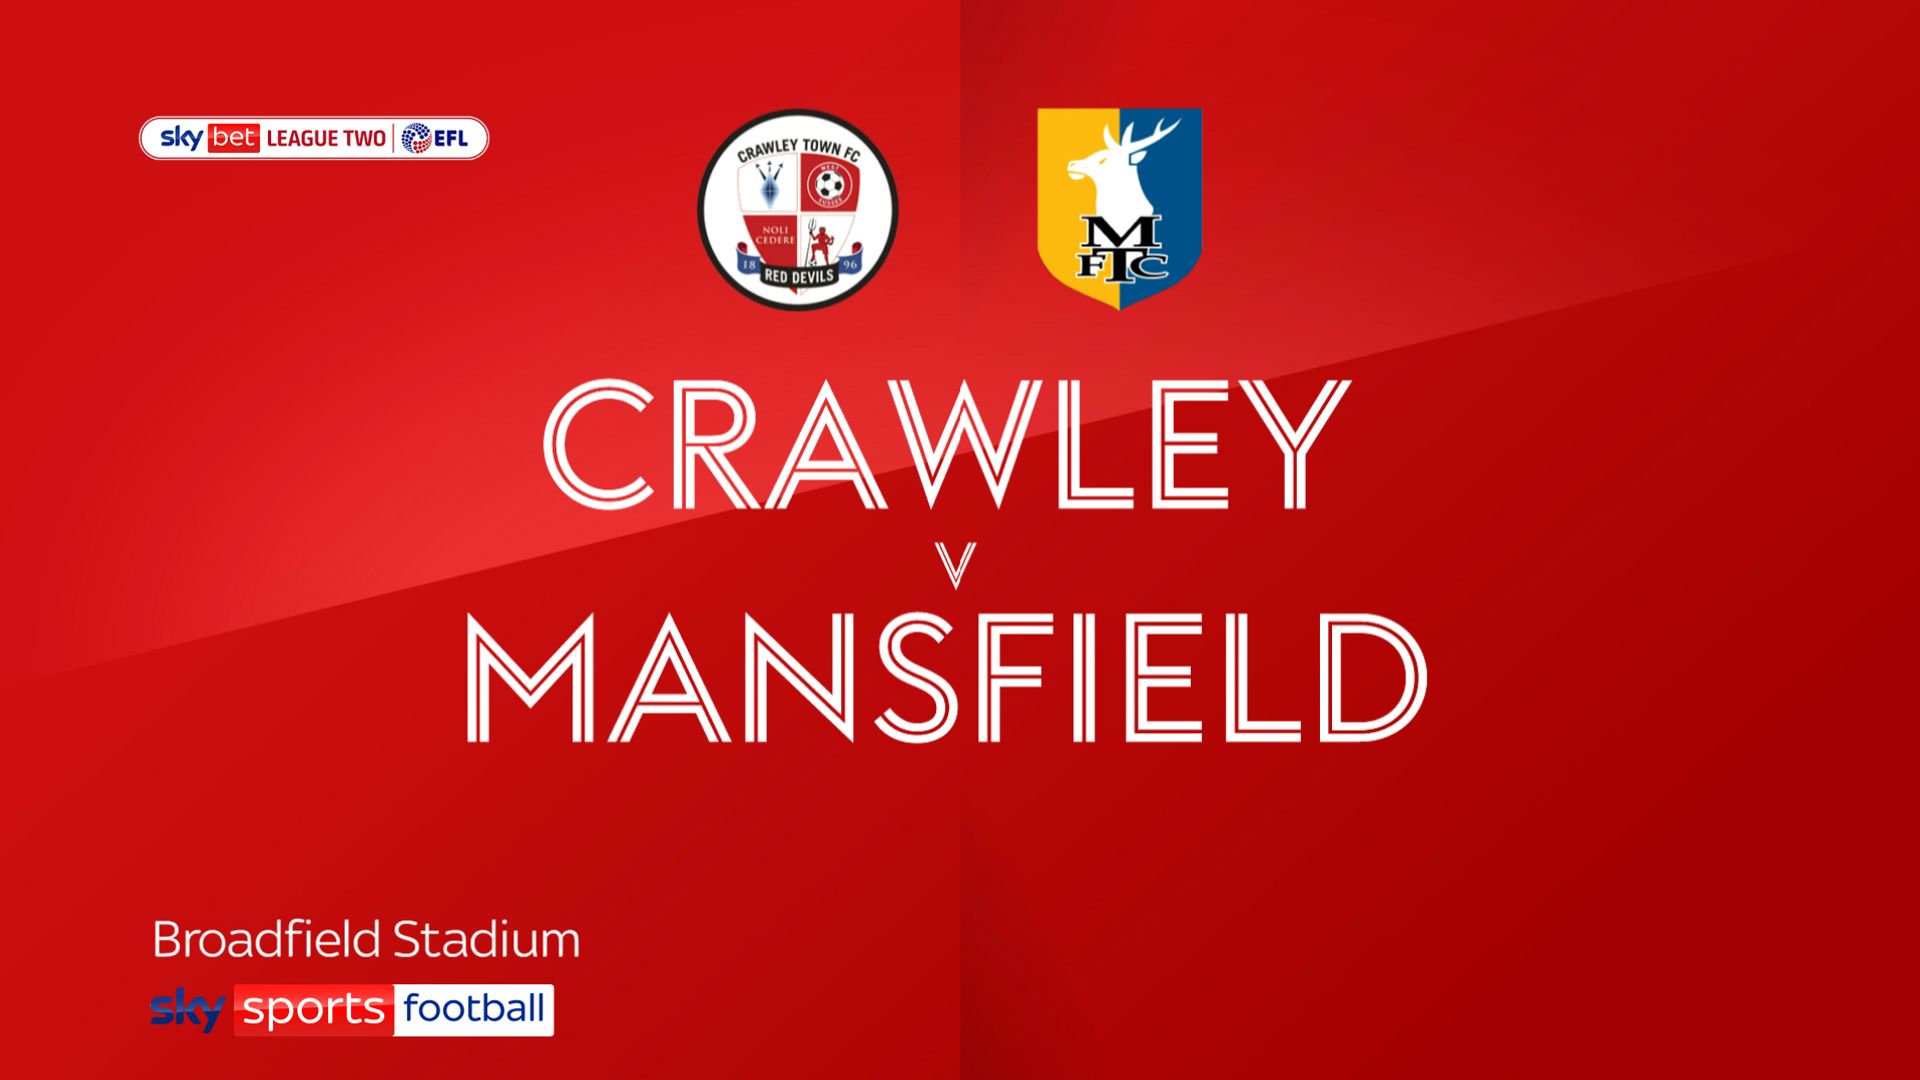 Crawley 3-2 Mansfield: Ashley Nadesan nets double to move Reds out of relegation zone